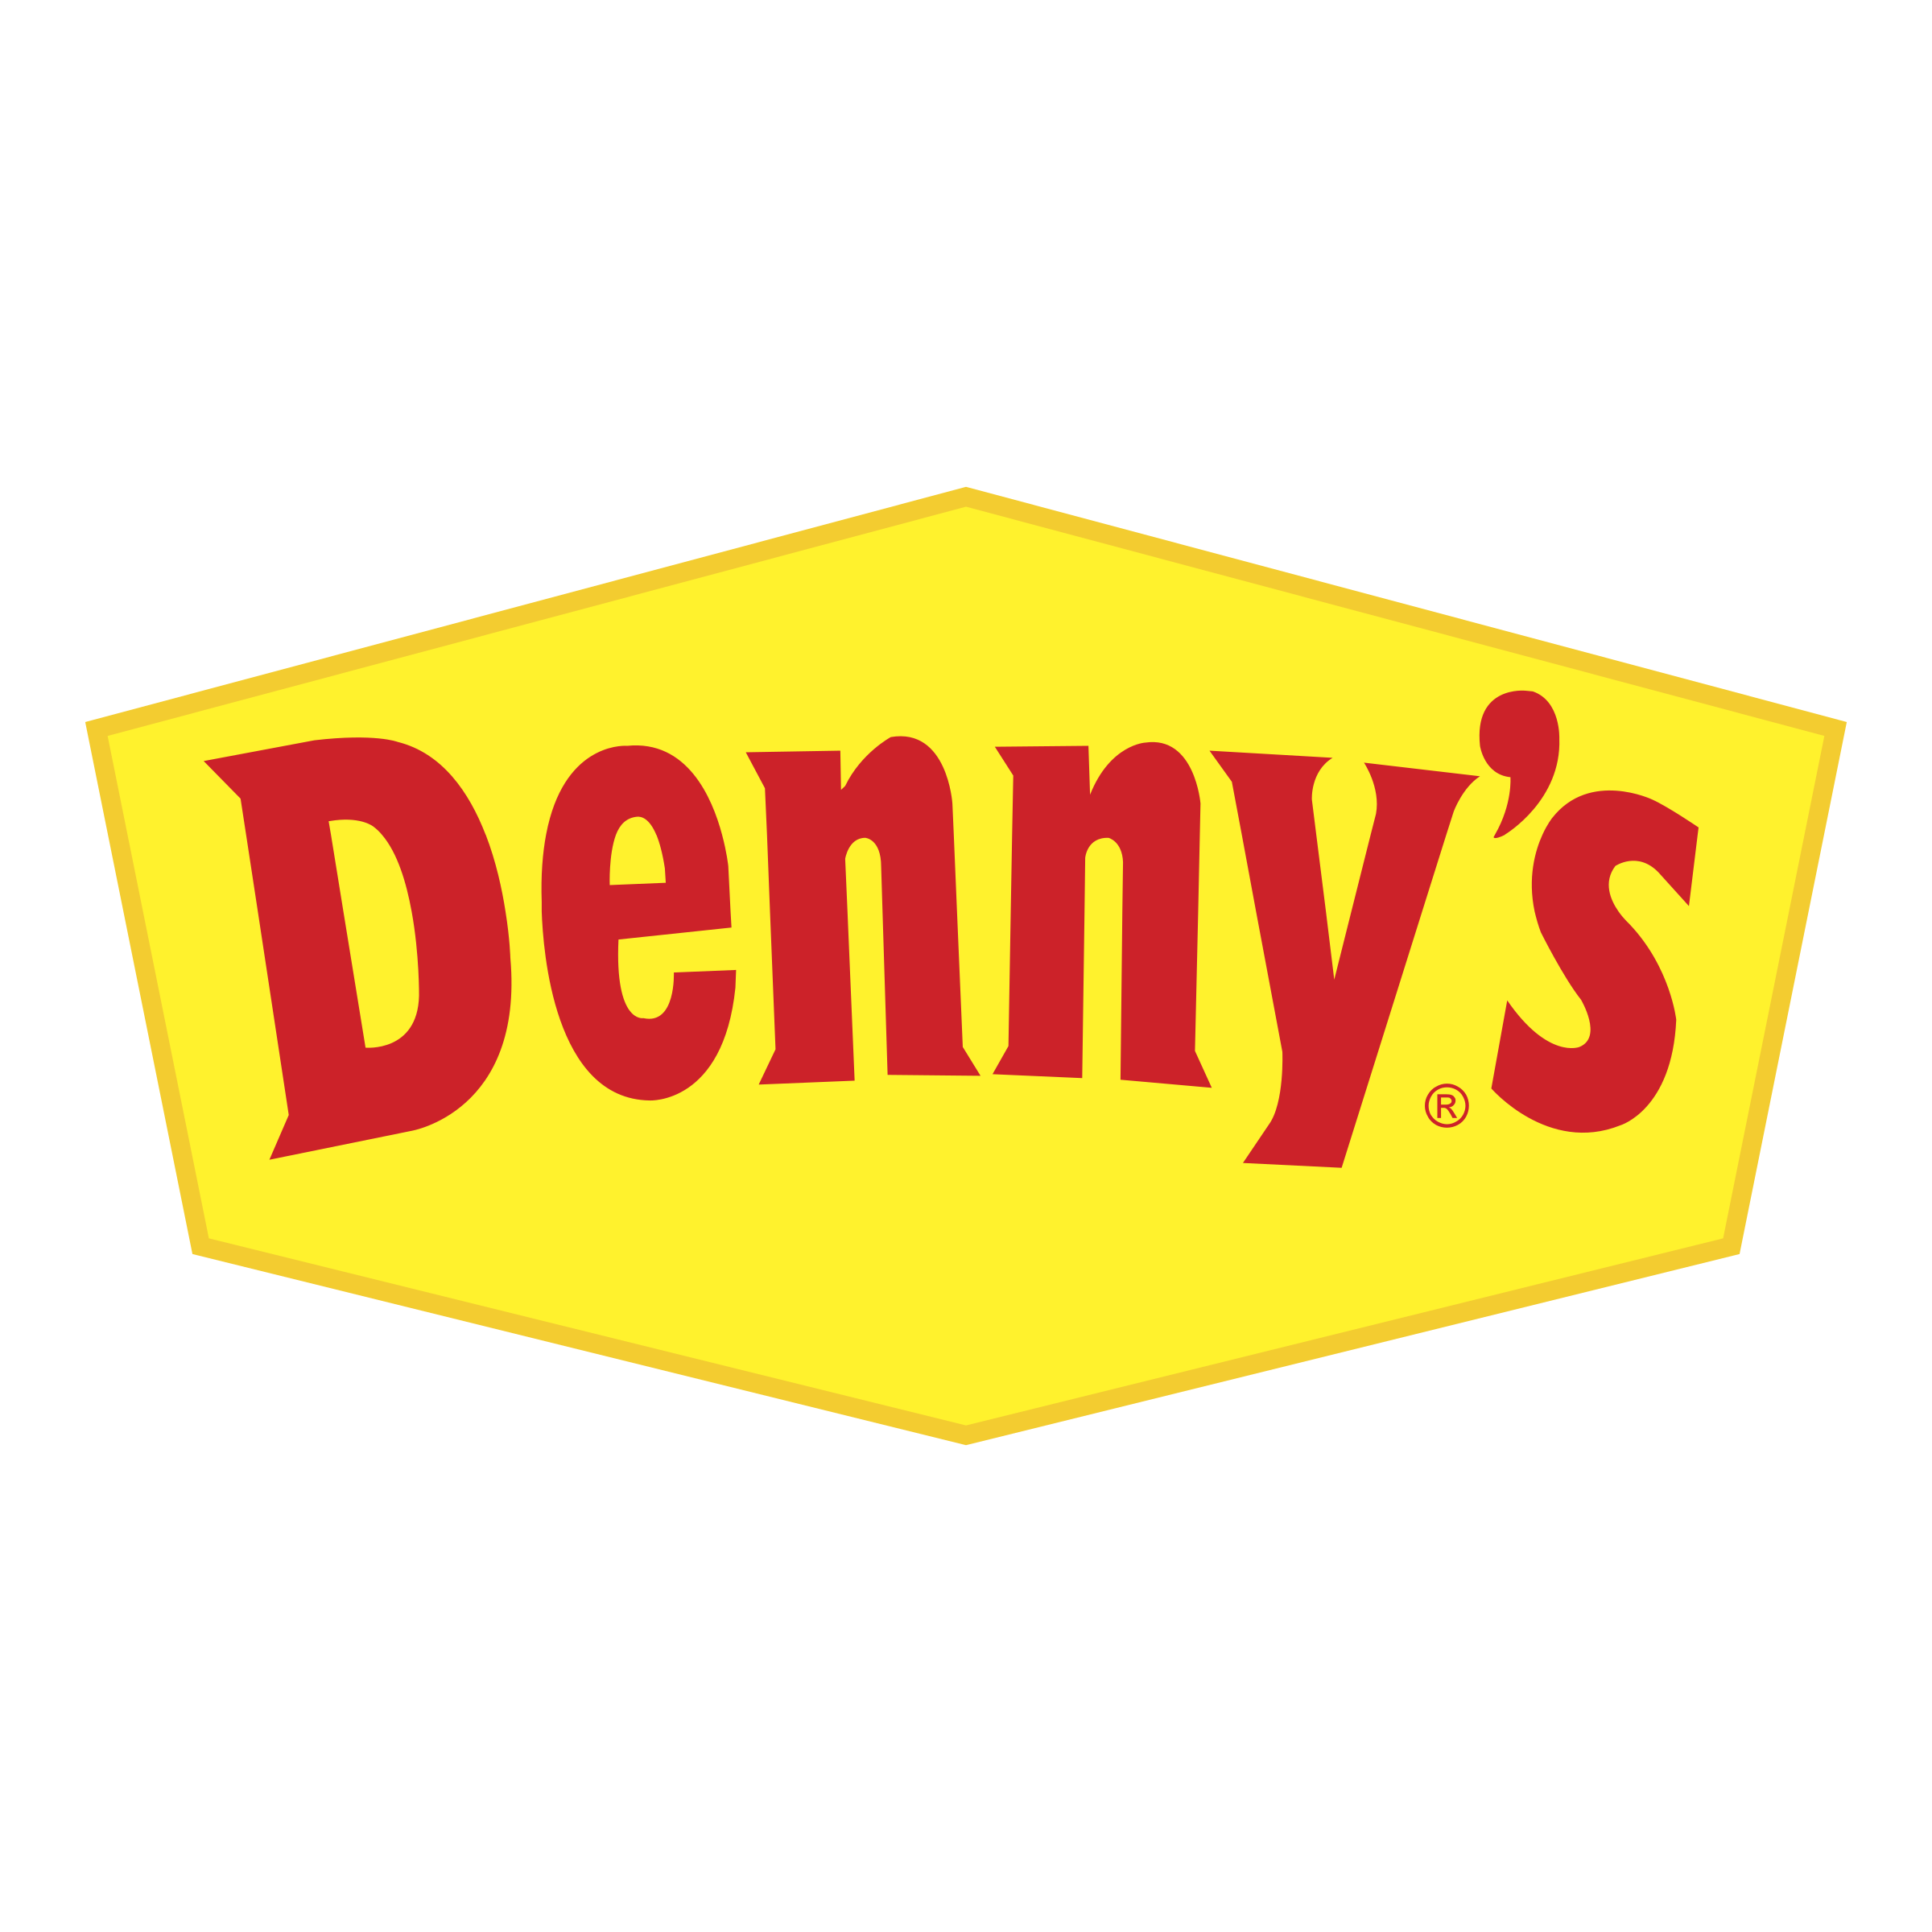 Denny's in Laveen, AZ at 5975 W Baseline Rd